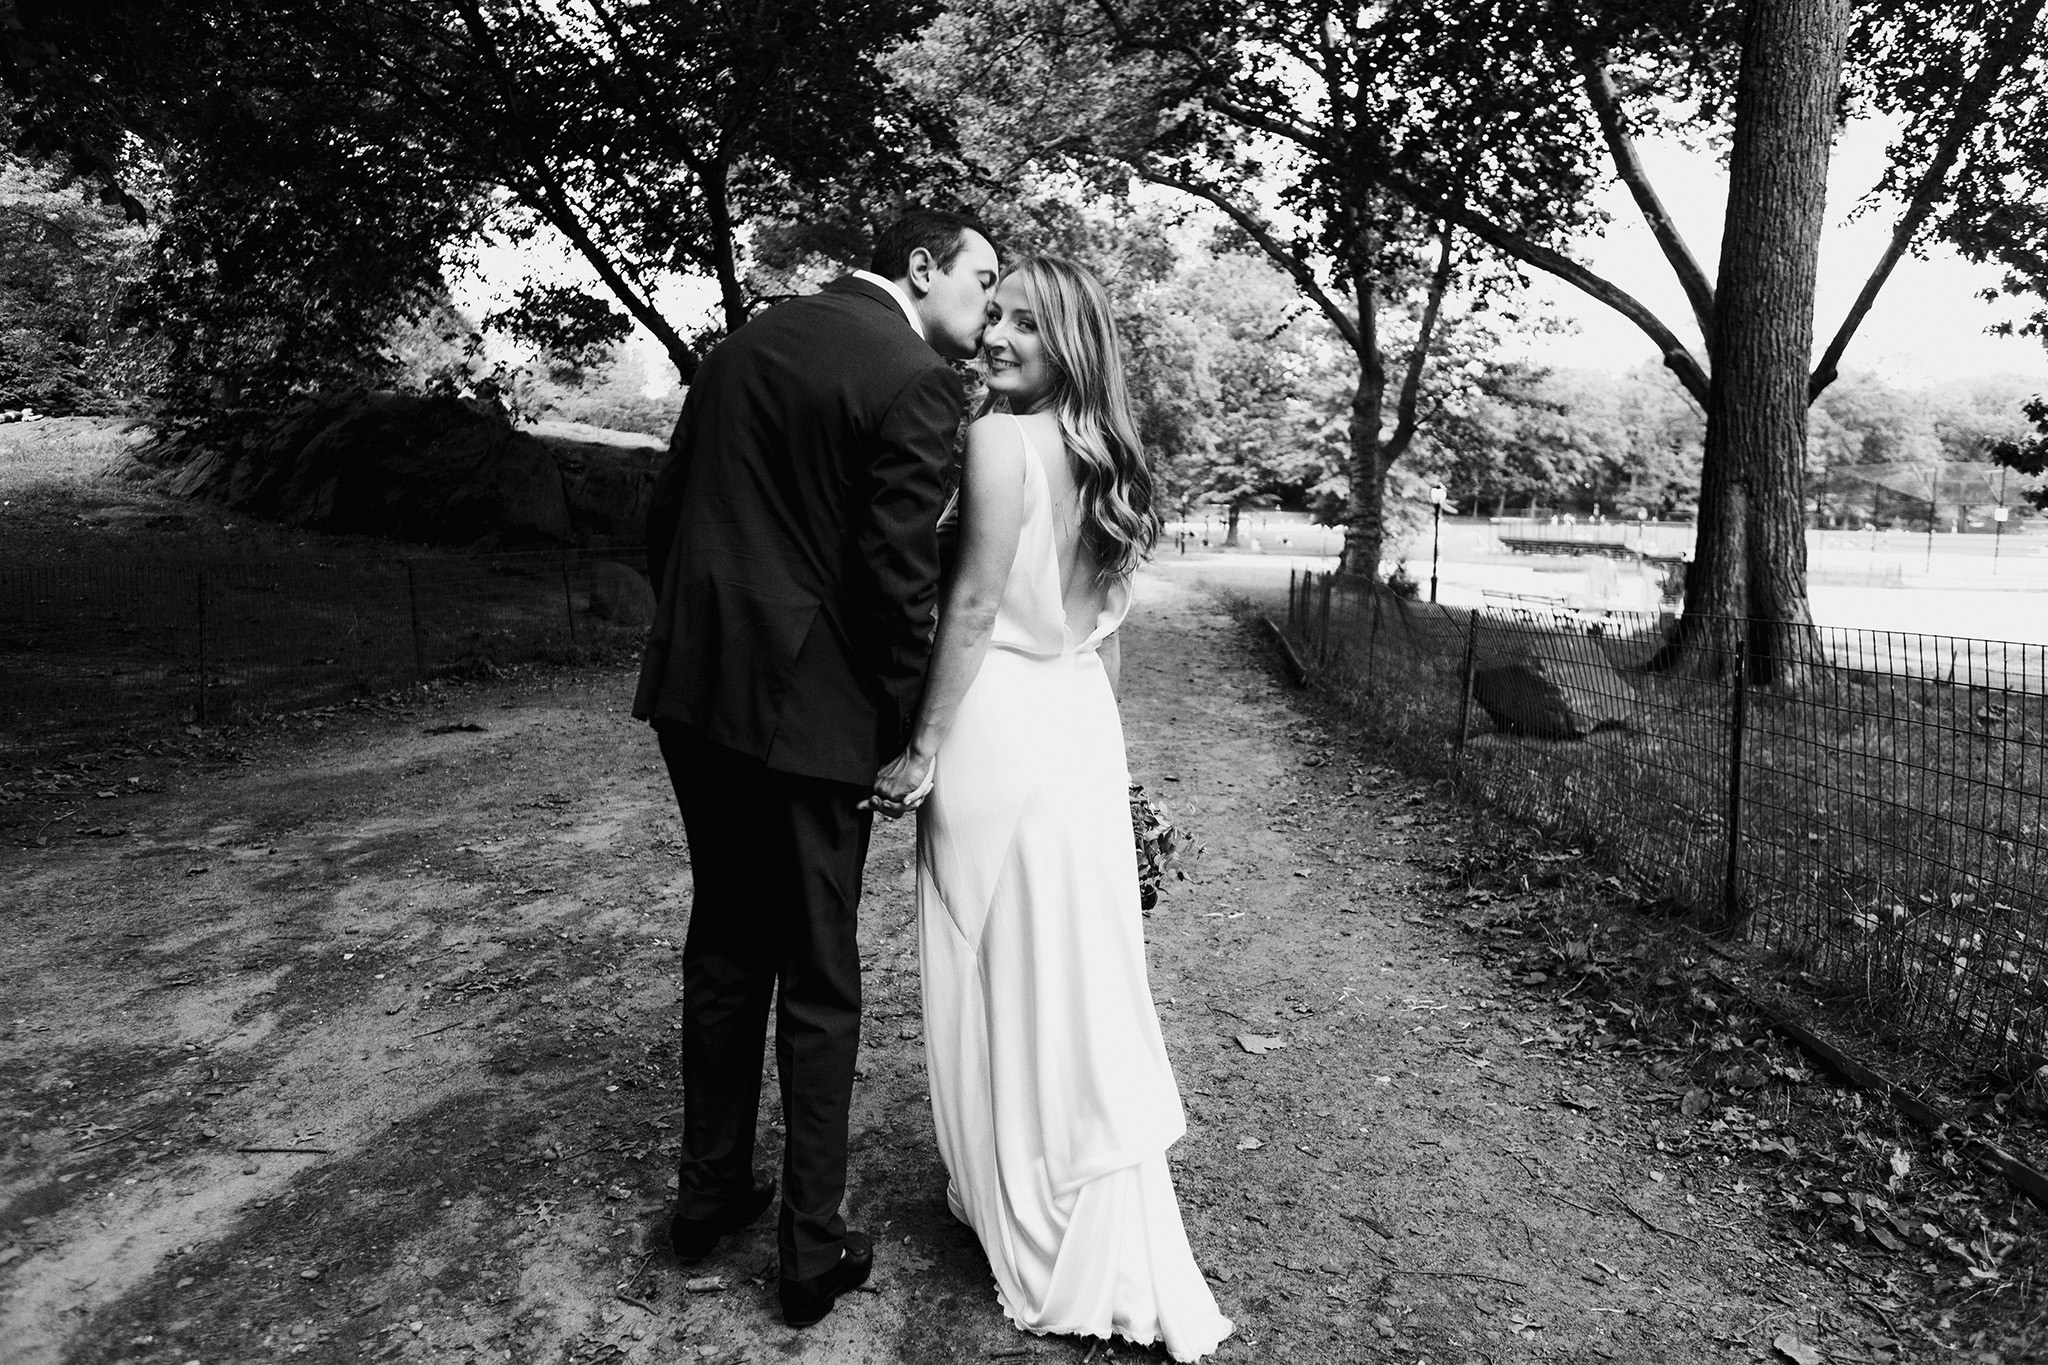 Groom kisses his bride on the cheek while they walk through Central Park, Manhattan